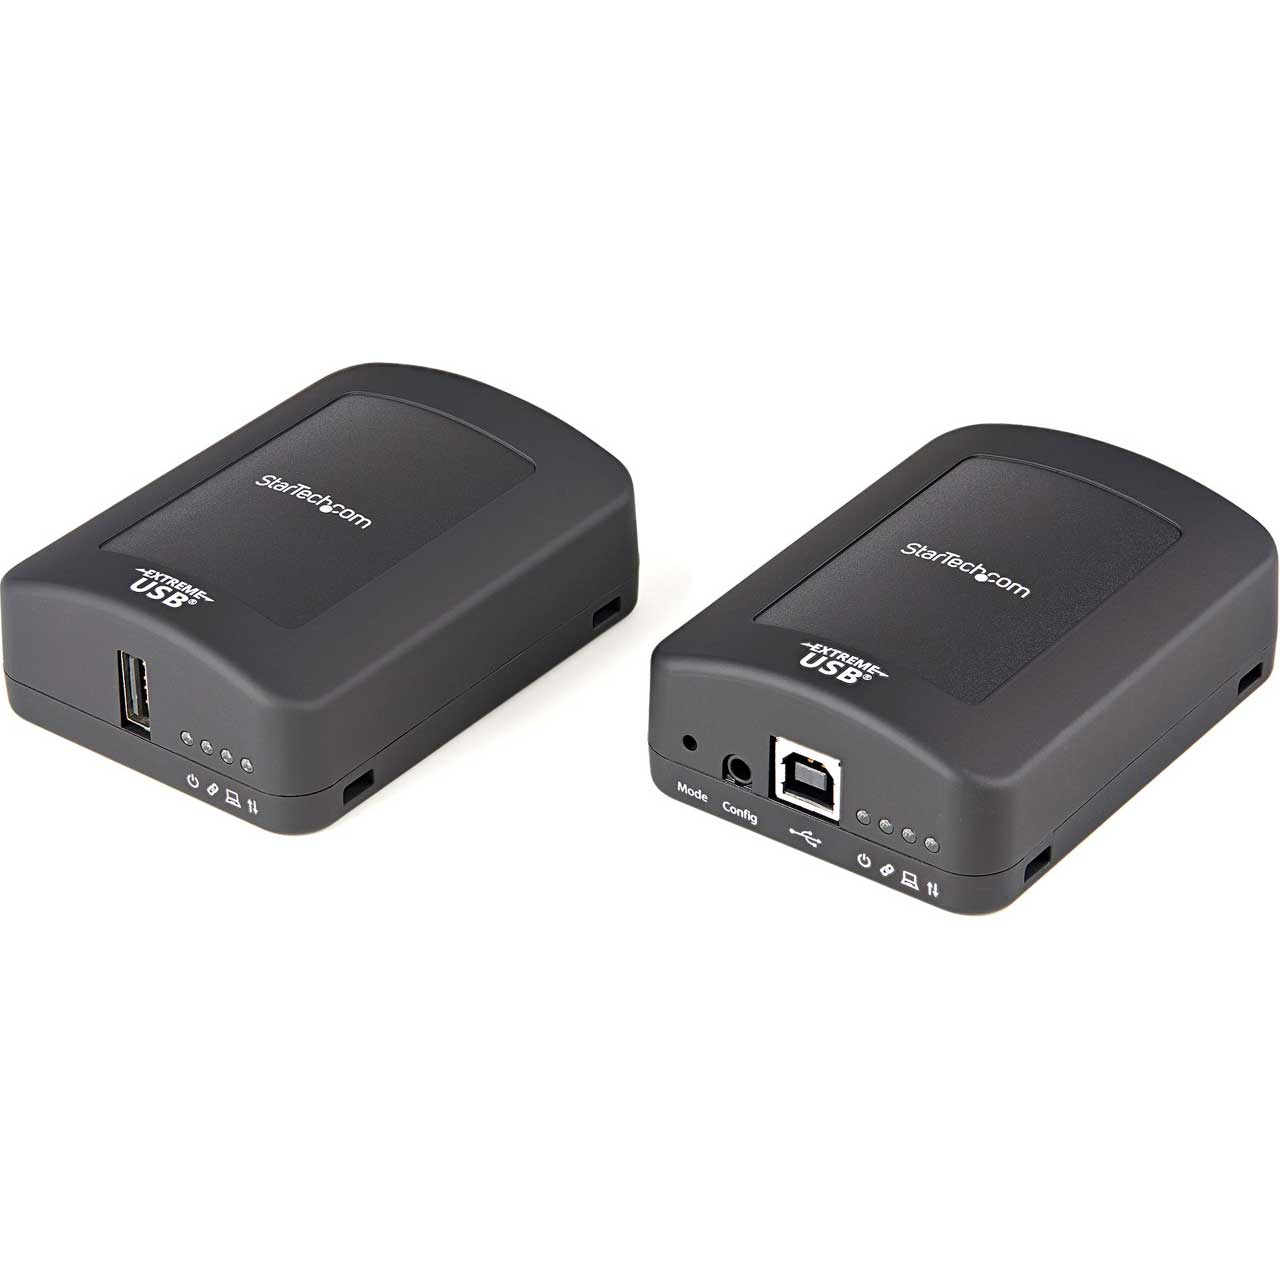 StarTech USB2001EXT2PNA USB 2.0 Extender over Cat5e/Cat6 Cable (RJ45) - Locally or Remotely Powered USB2001EXT2PNA